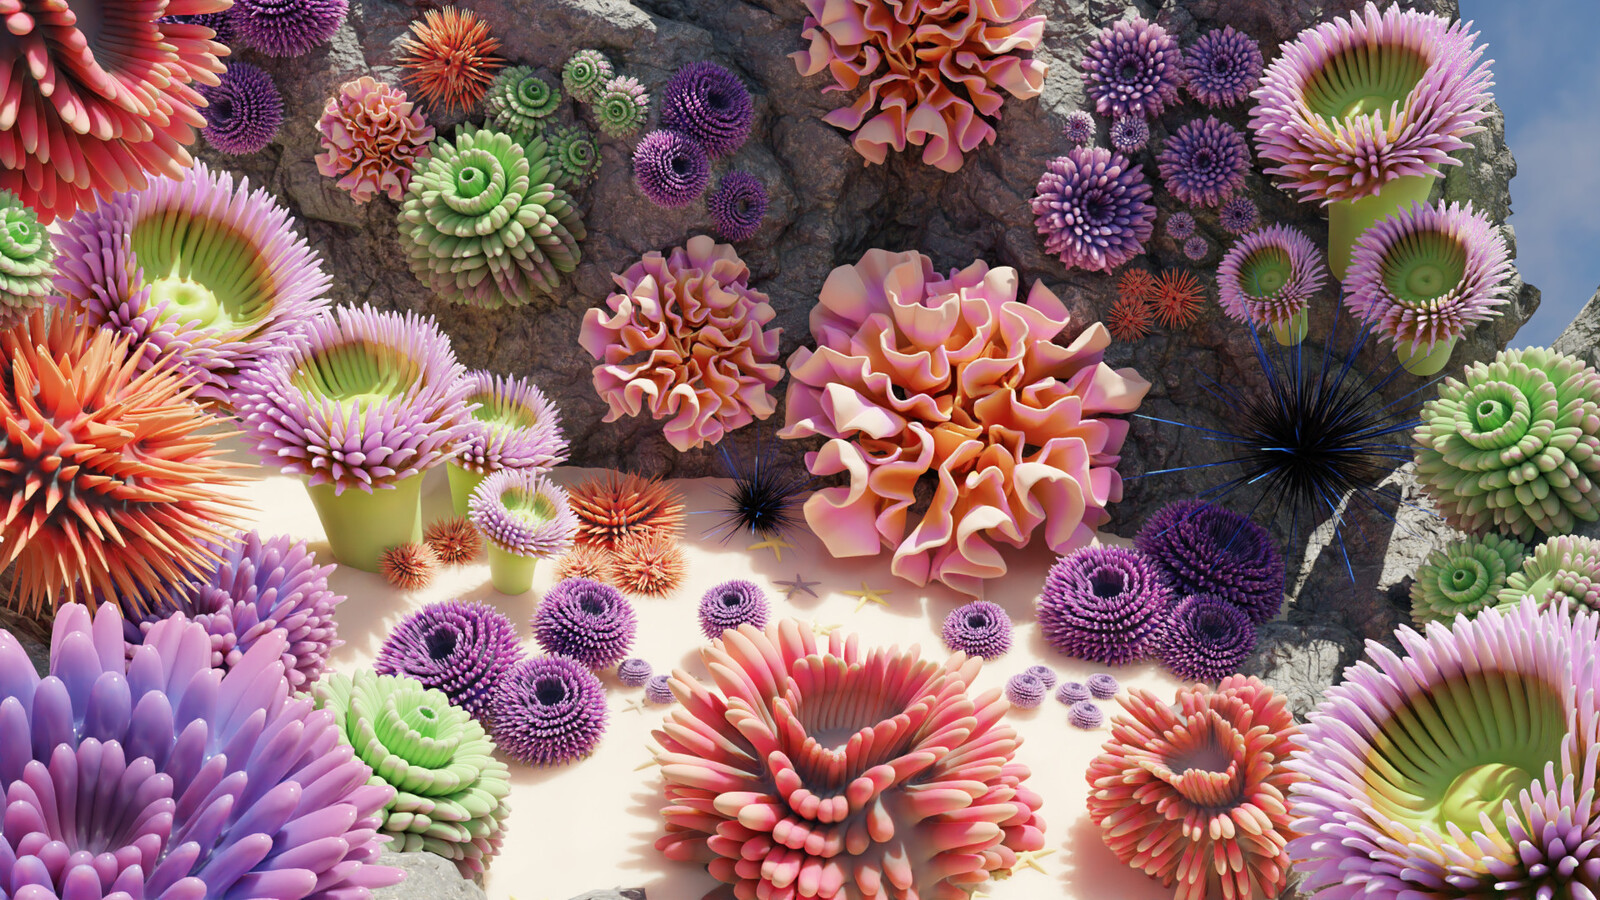 Lowpoly Coral, Urchins, Anemones